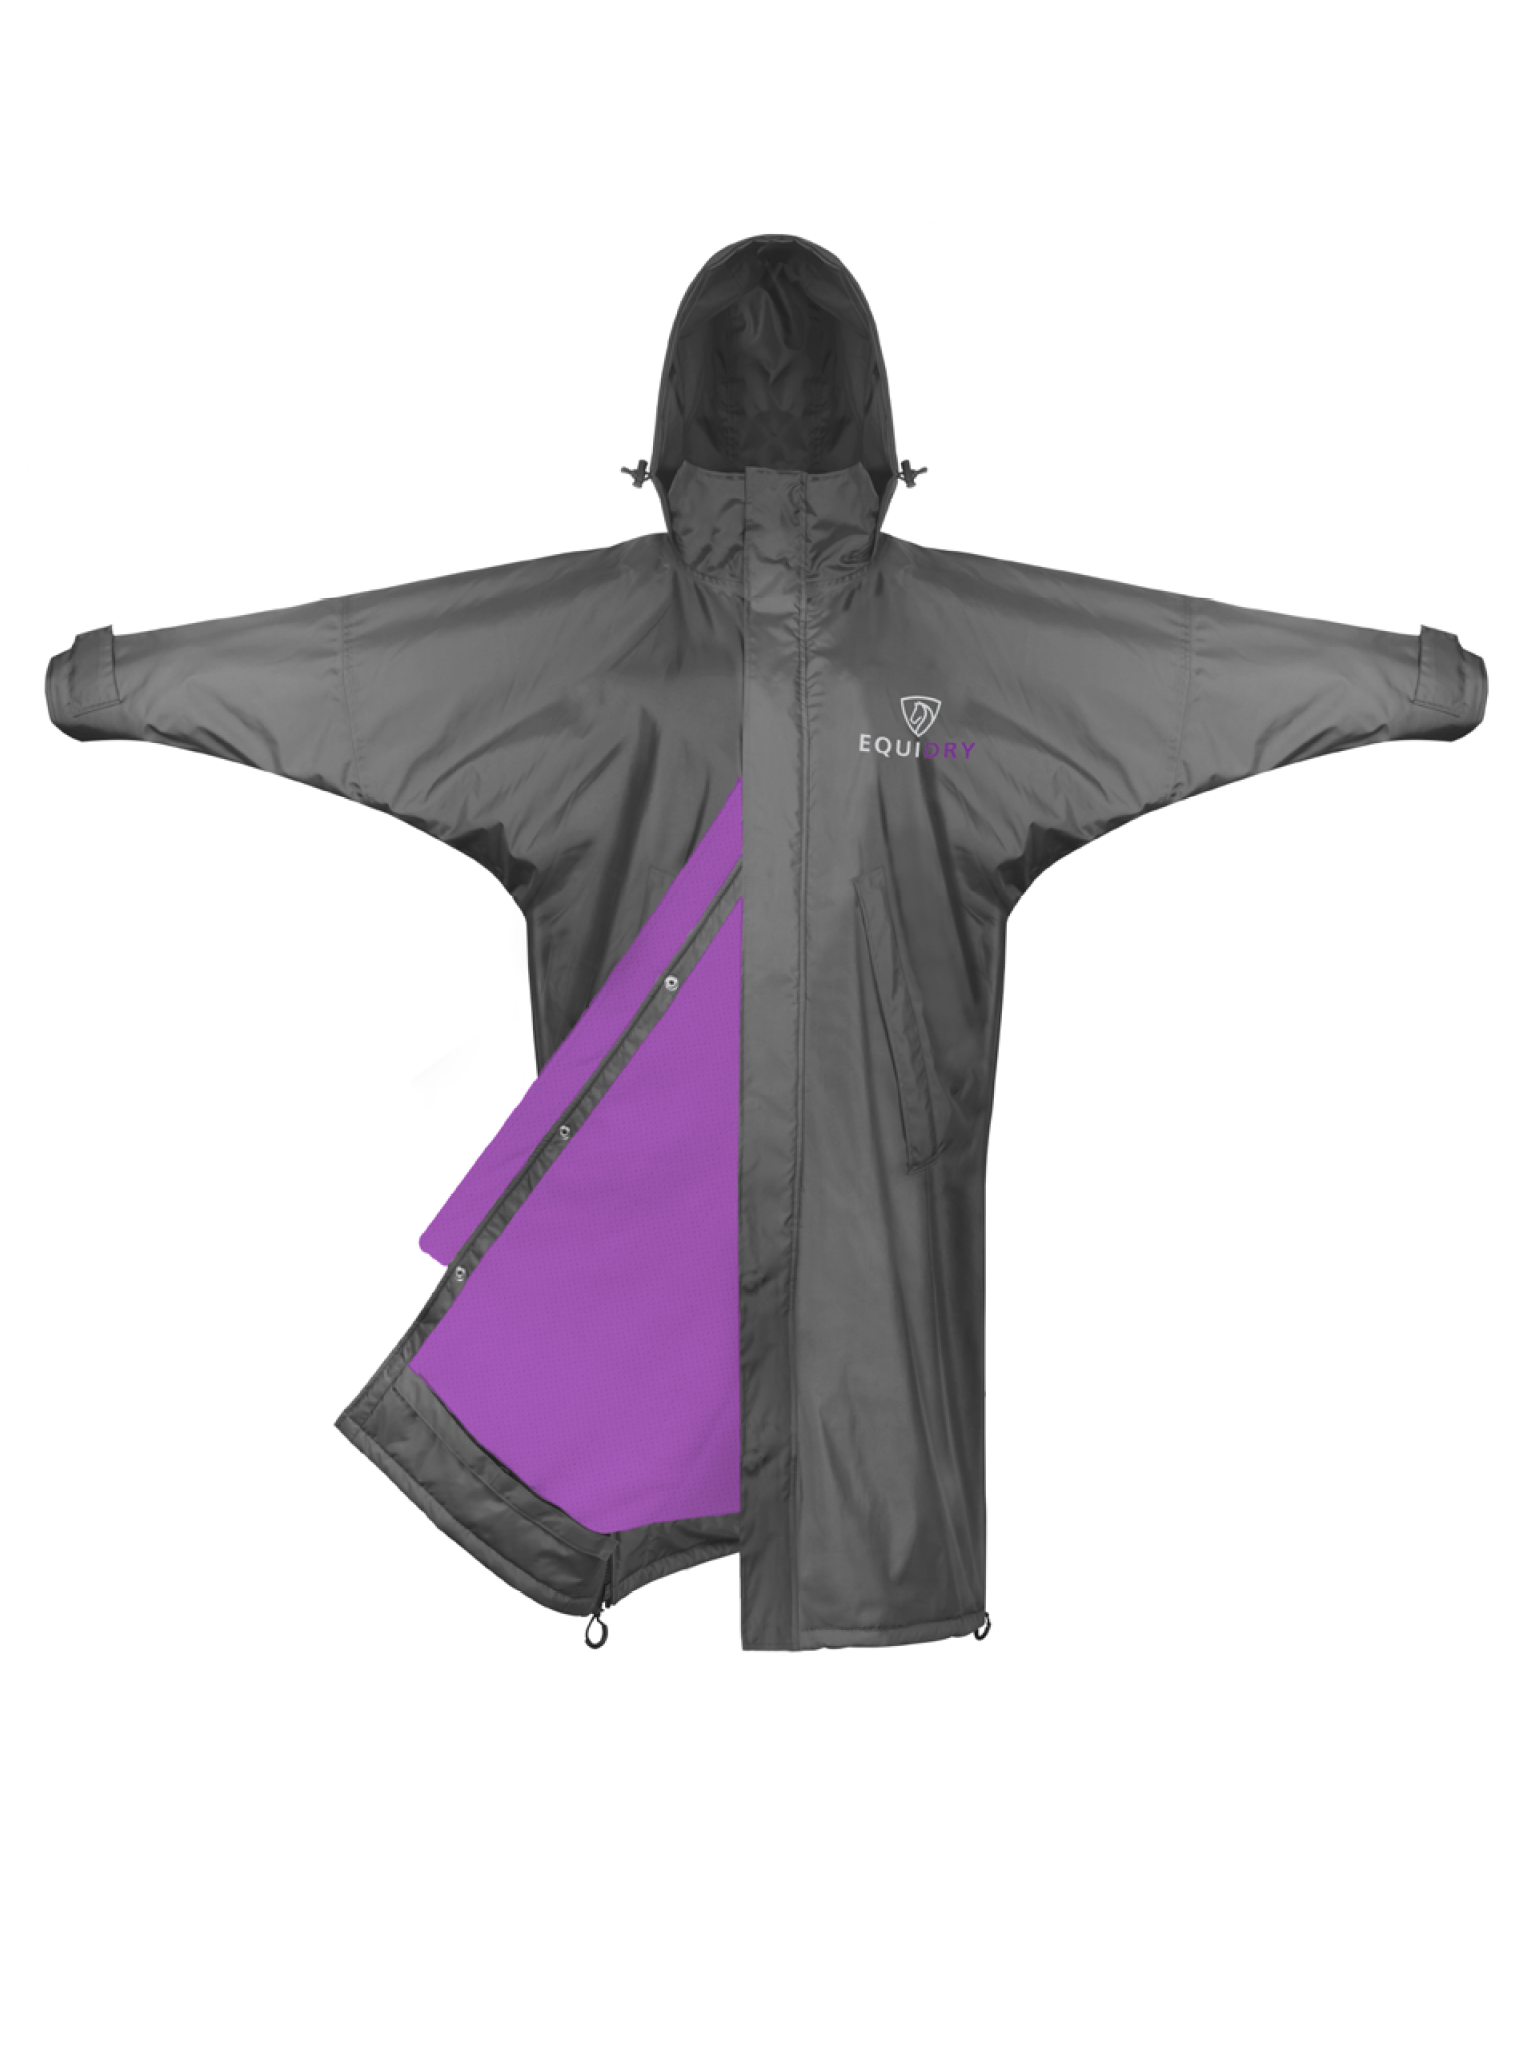 Equimac_charcoal_lilac_front_1.png